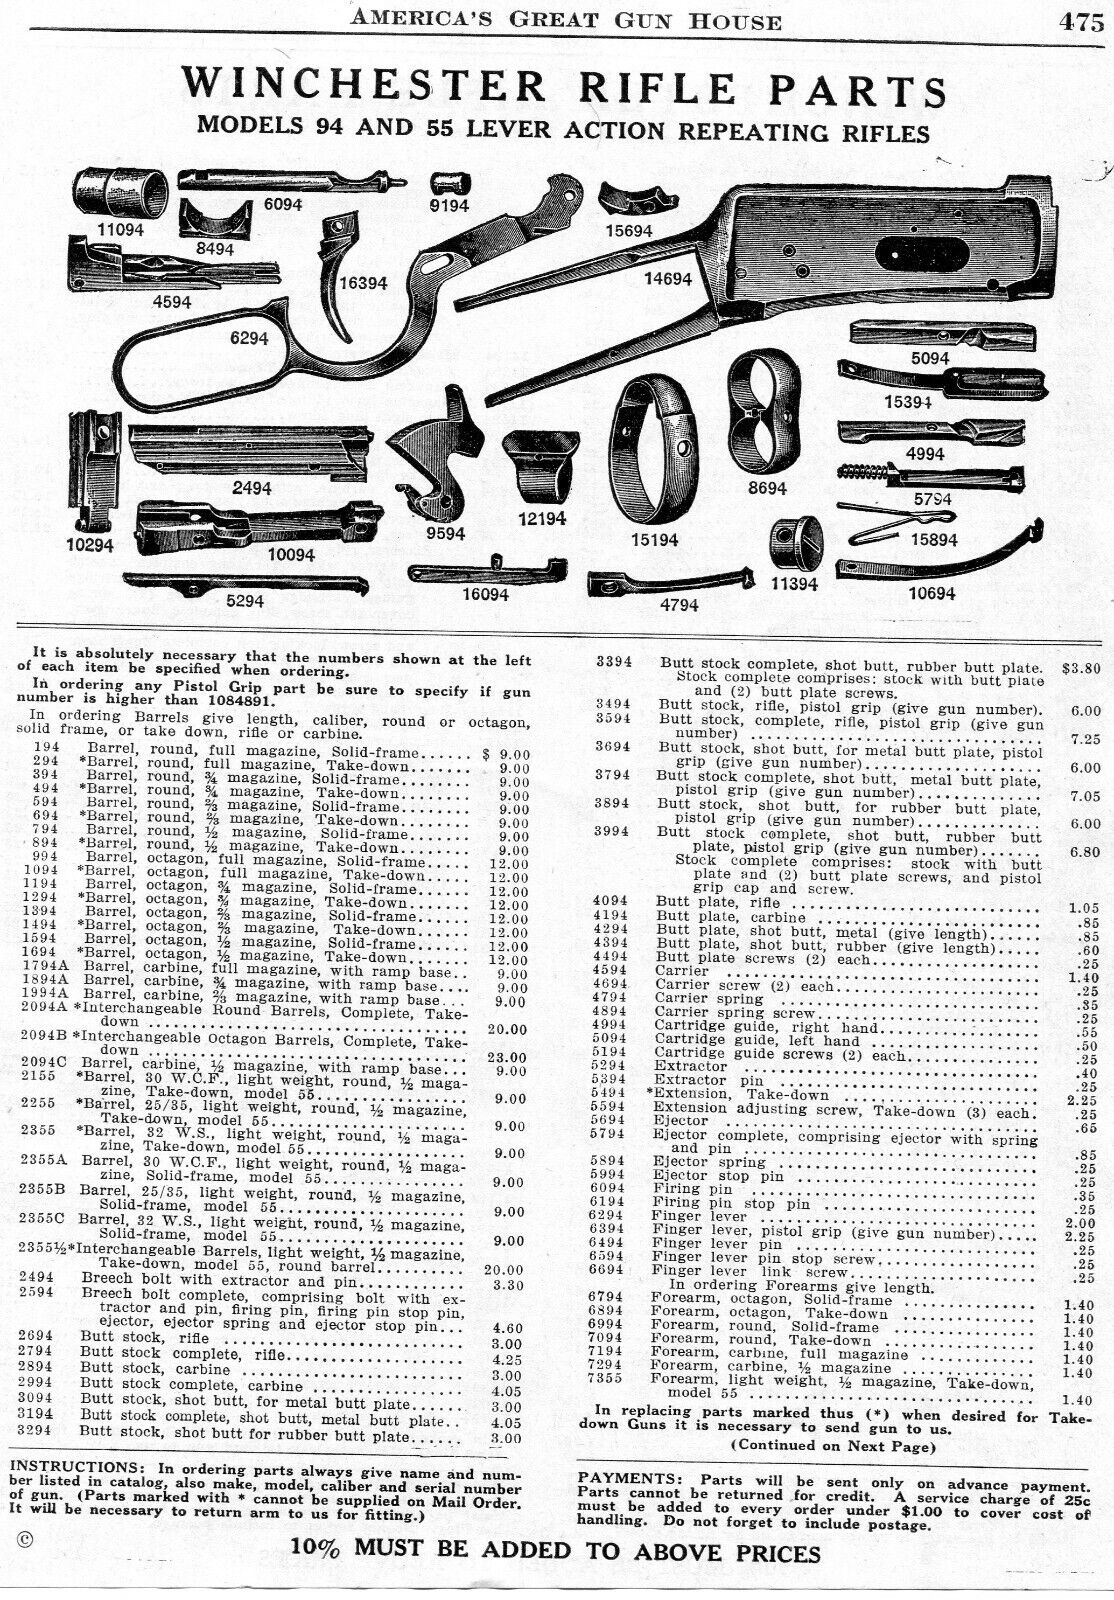 1943 Print Ad of Winchester Model 94 & 55 Lever Action Rifle Parts List